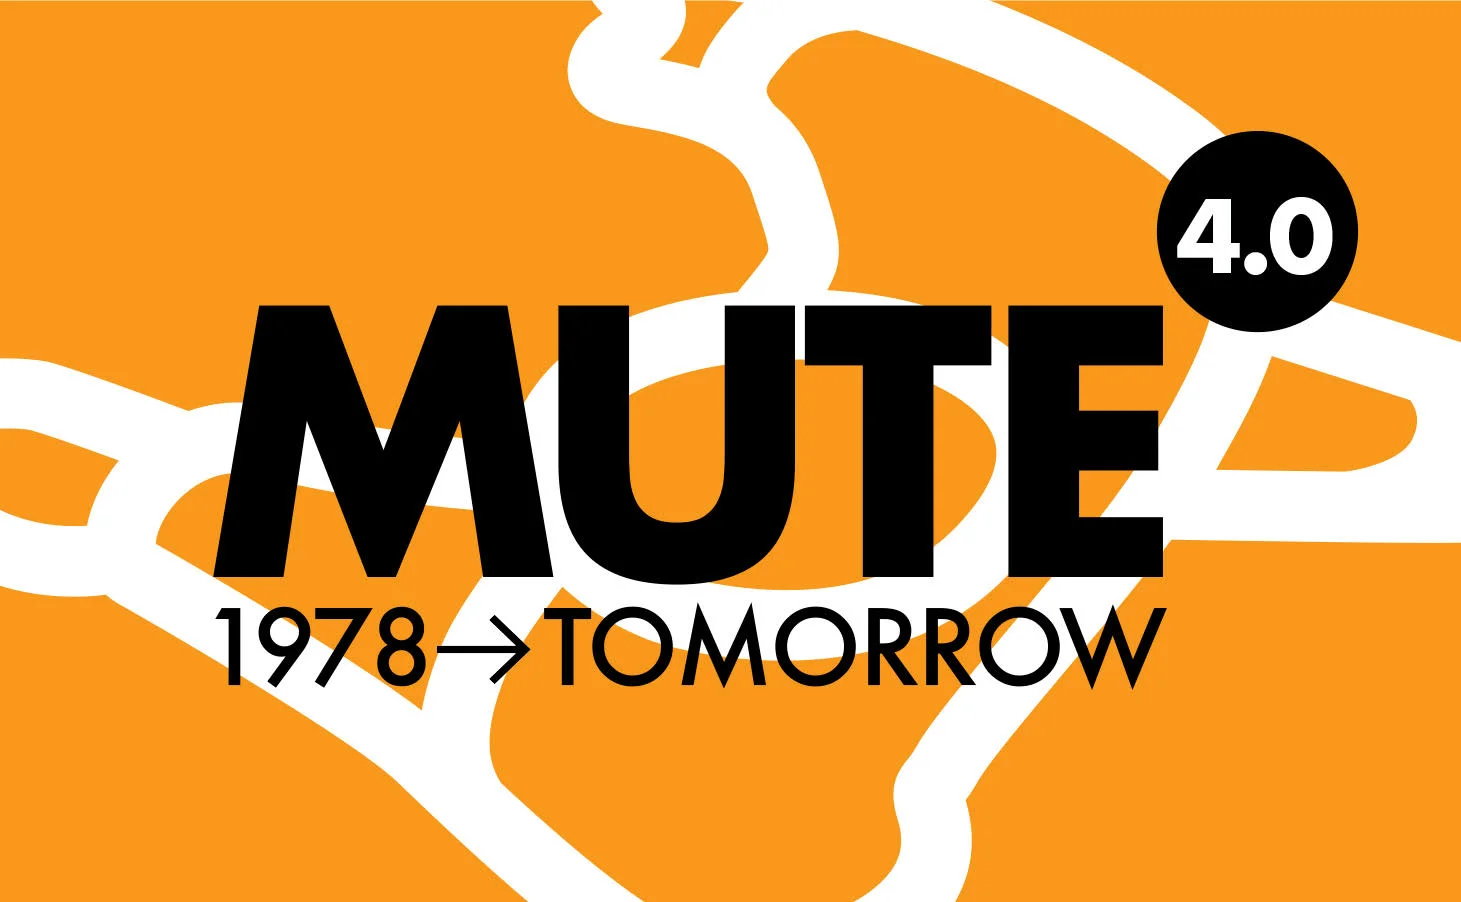 Mute 4.0 - From 1978 to Tomorrow